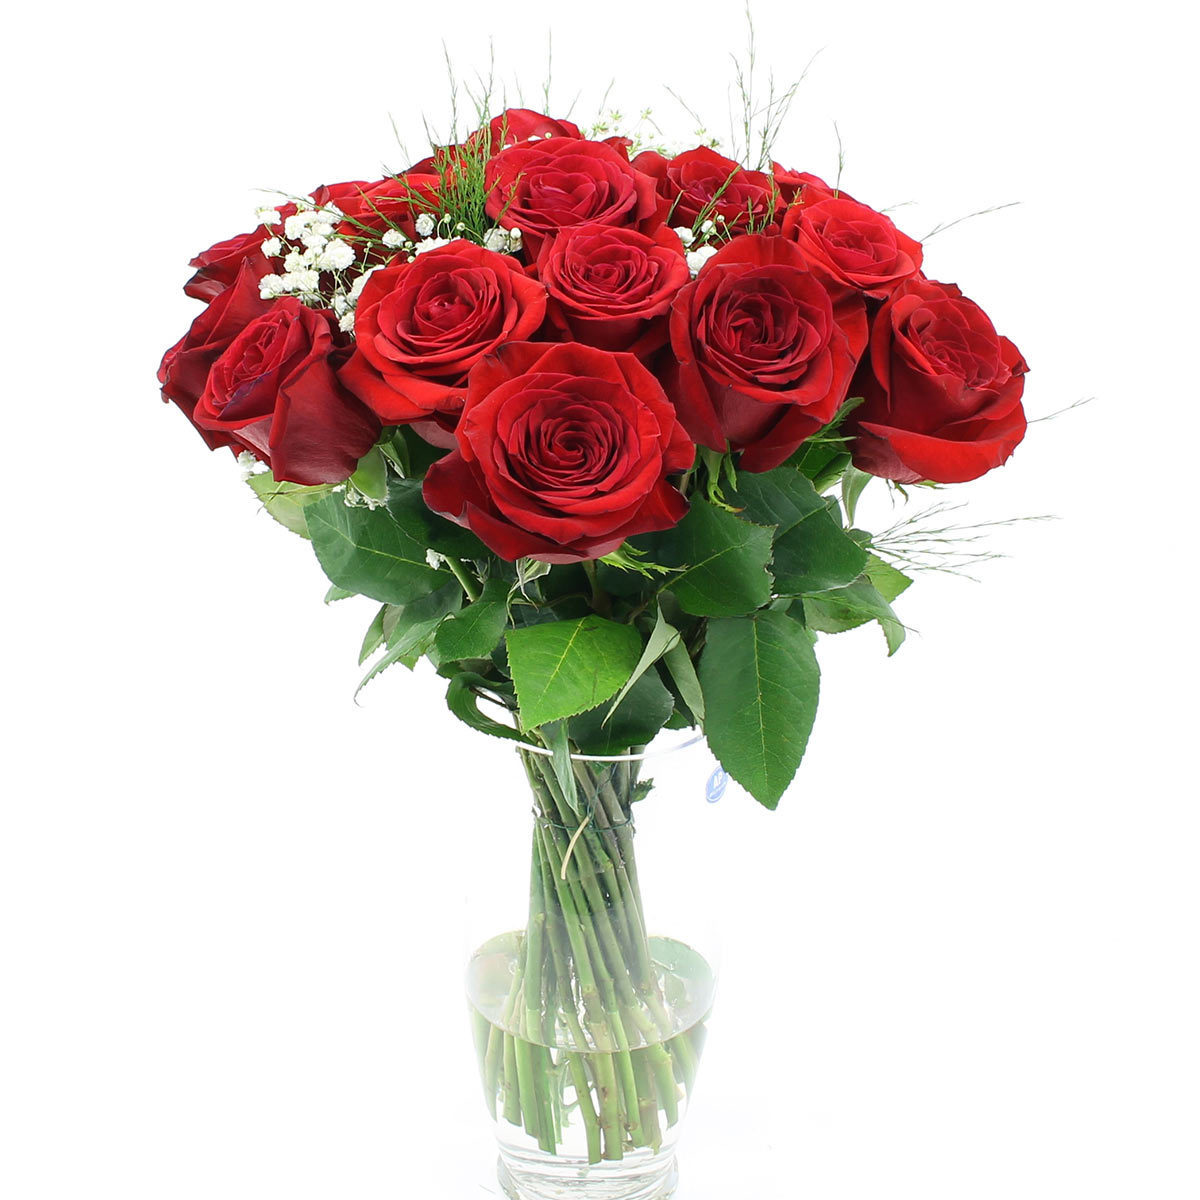 24 Stem Red Freedom Roses Flower Bouquet